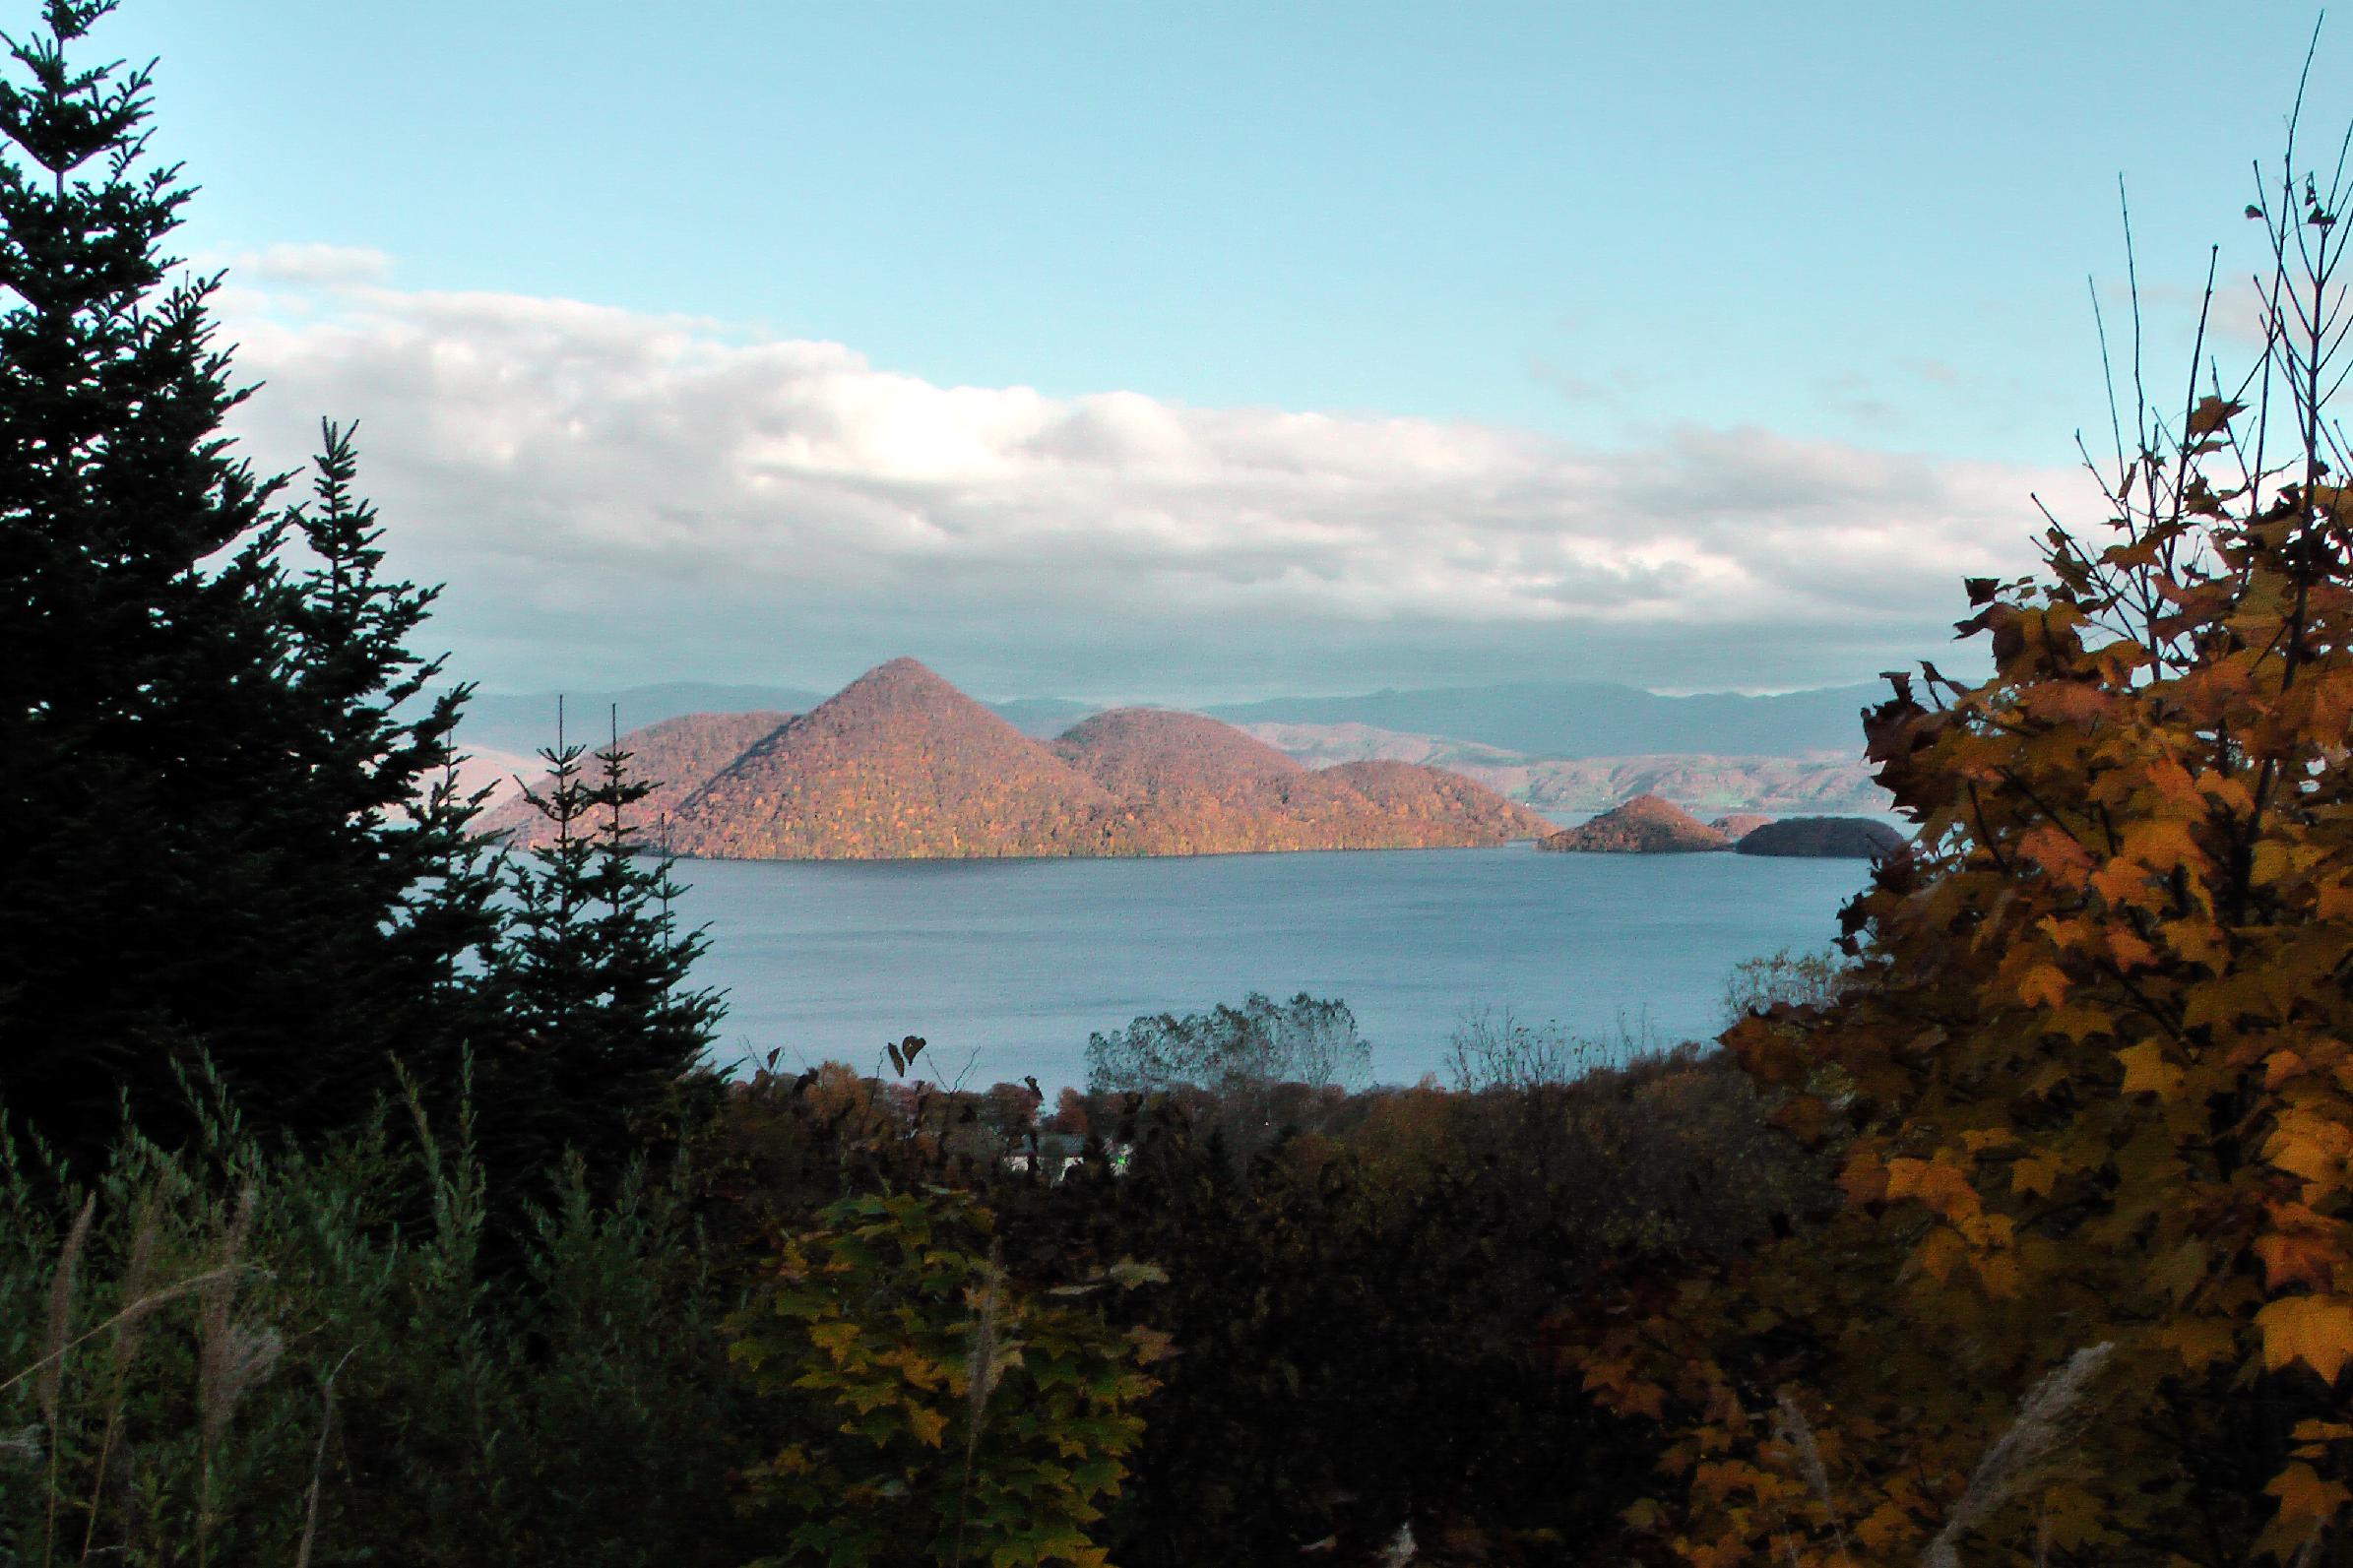 Lake Toya. View from the edge of the caldera